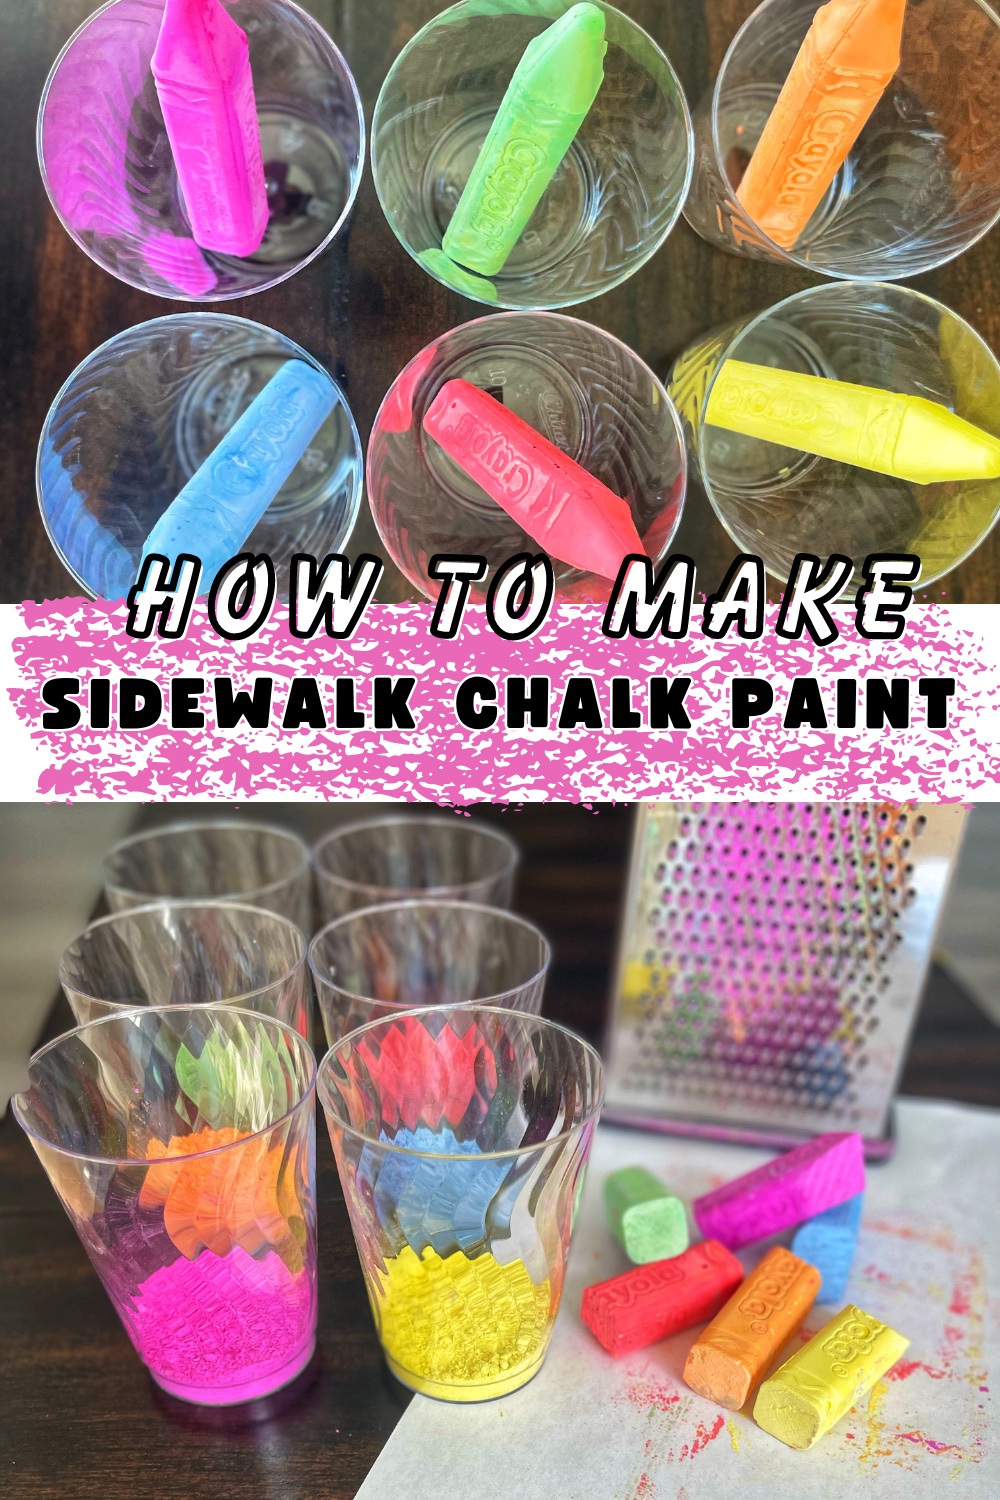 This summer, your kids will have a blast with this four-ingredient, diy sidewalk chalk paint. So easy to make, it's the perfect activity or when you're looking for a last-minute project on a busy summer day!